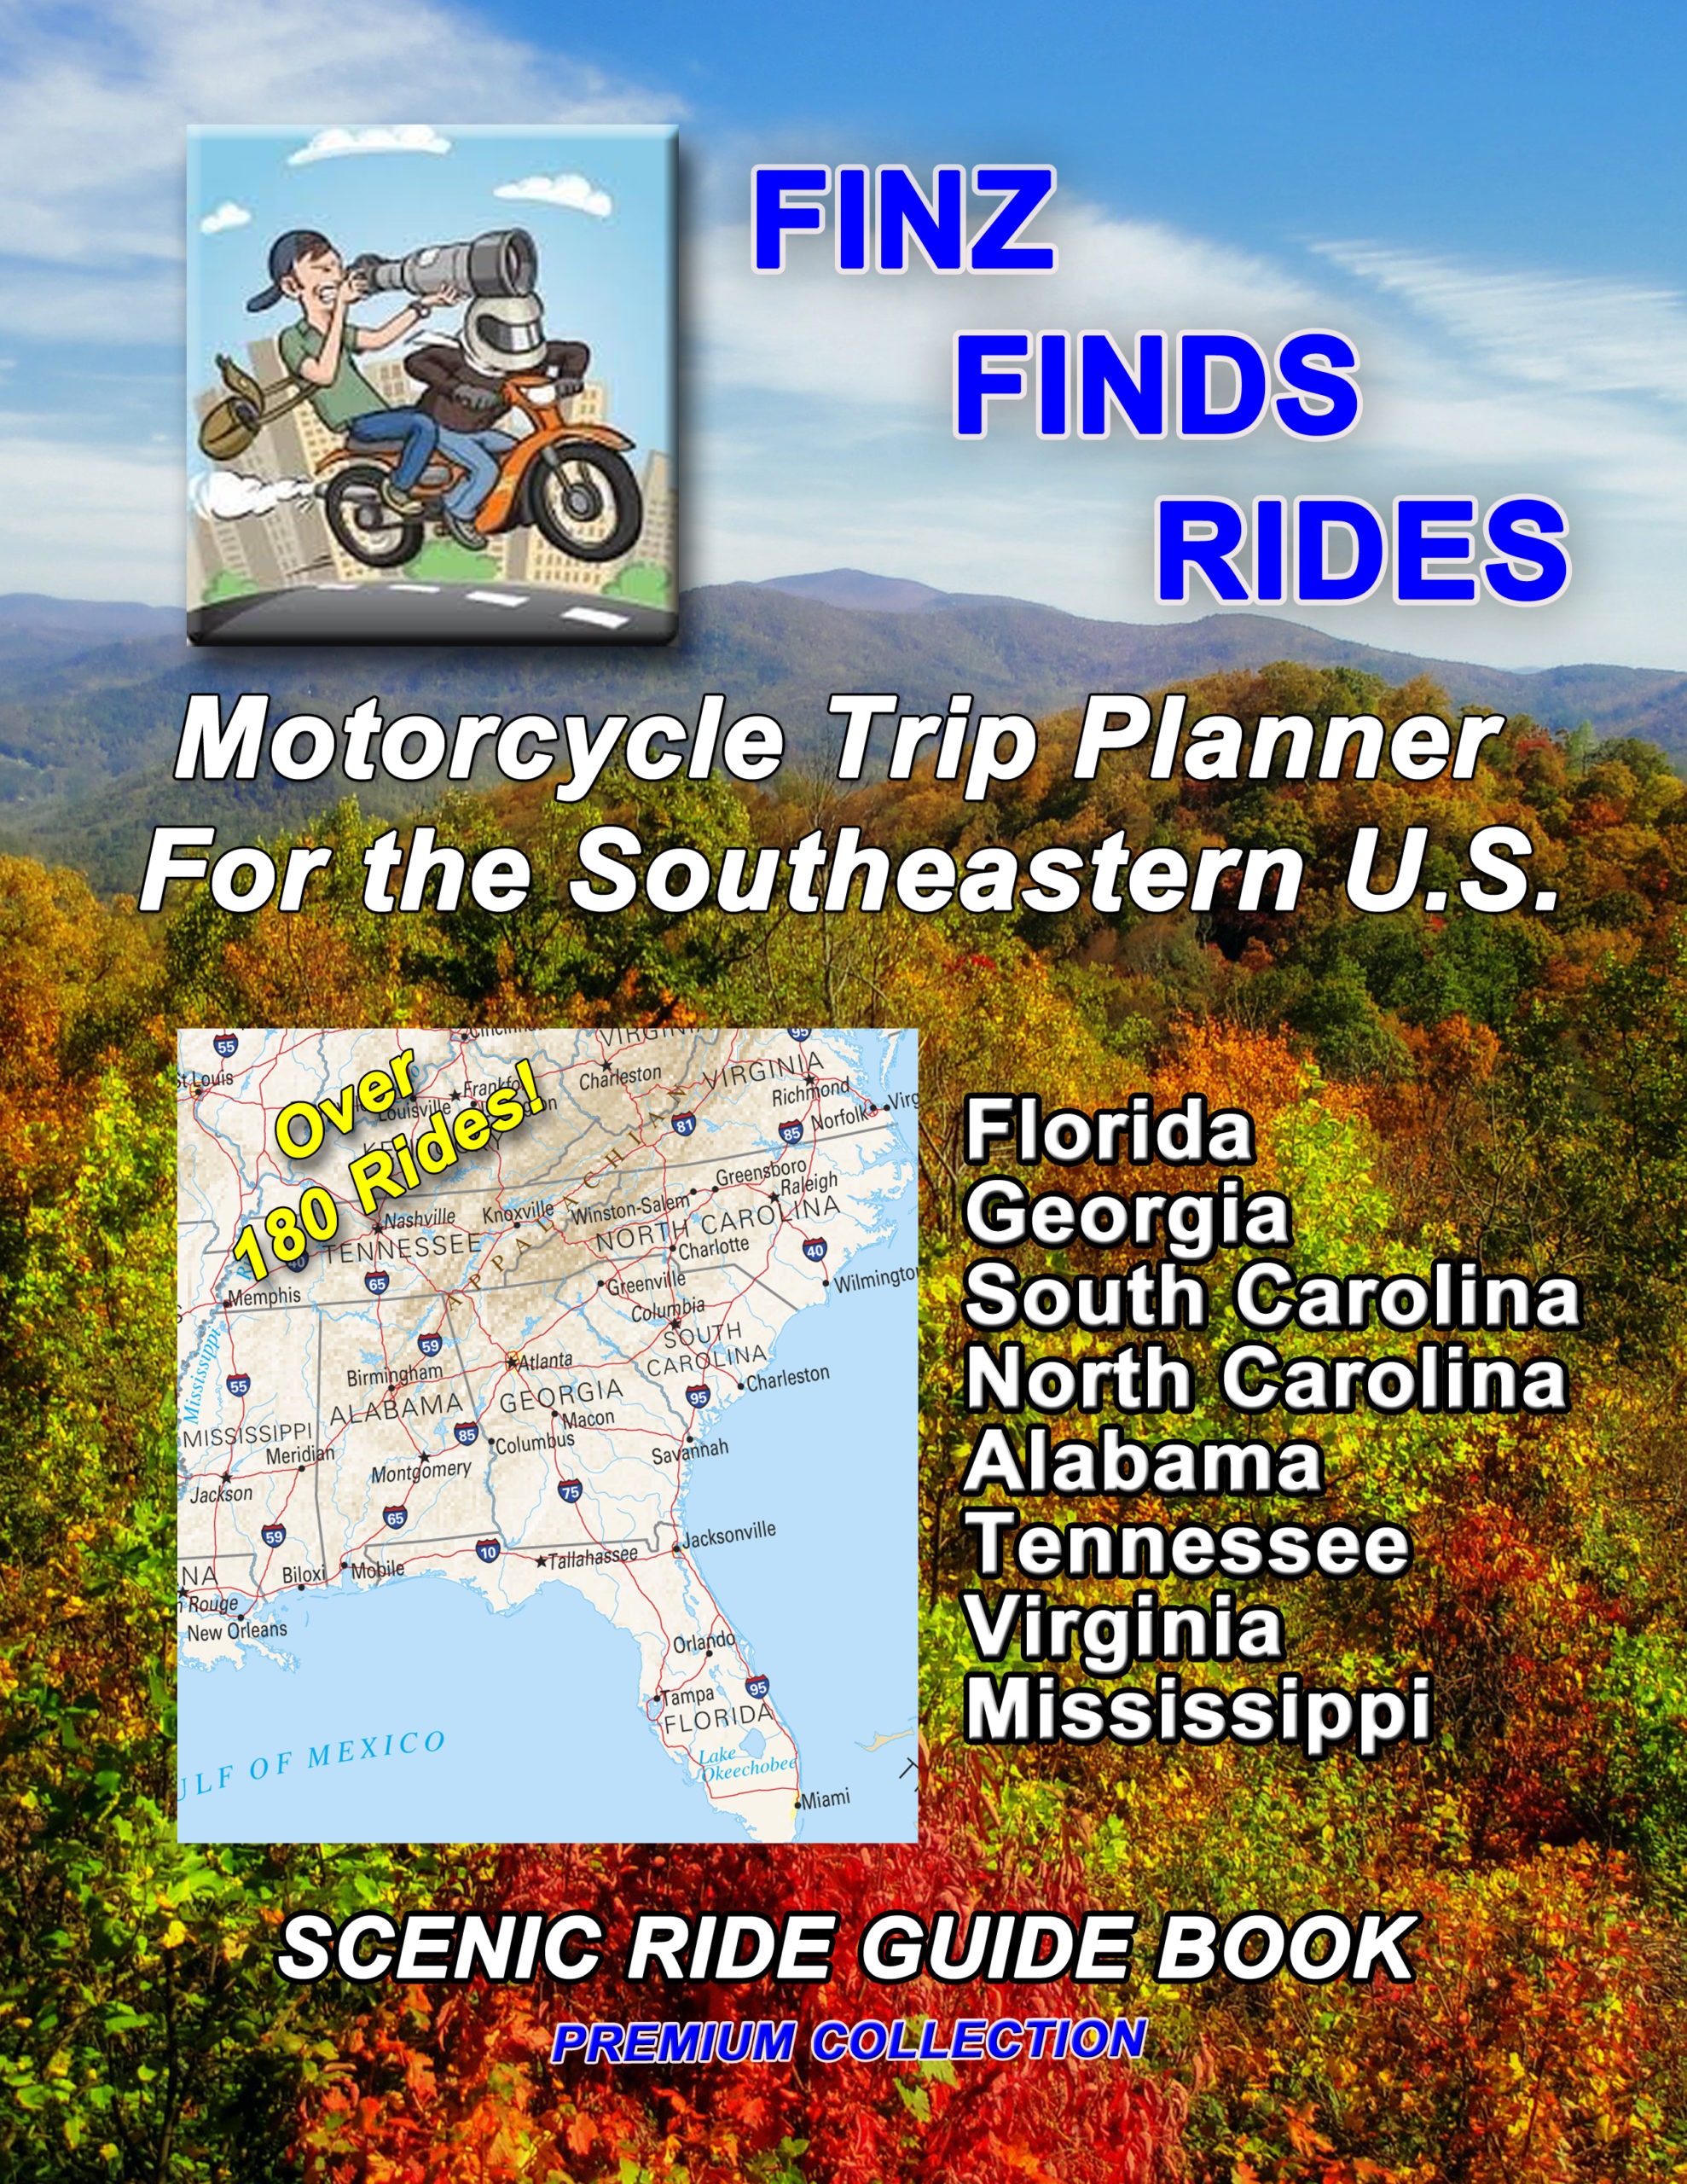 Scenic Ride Guide Book Motorcycle Trip Planner For The Southeastern U.S. – 184 Rides